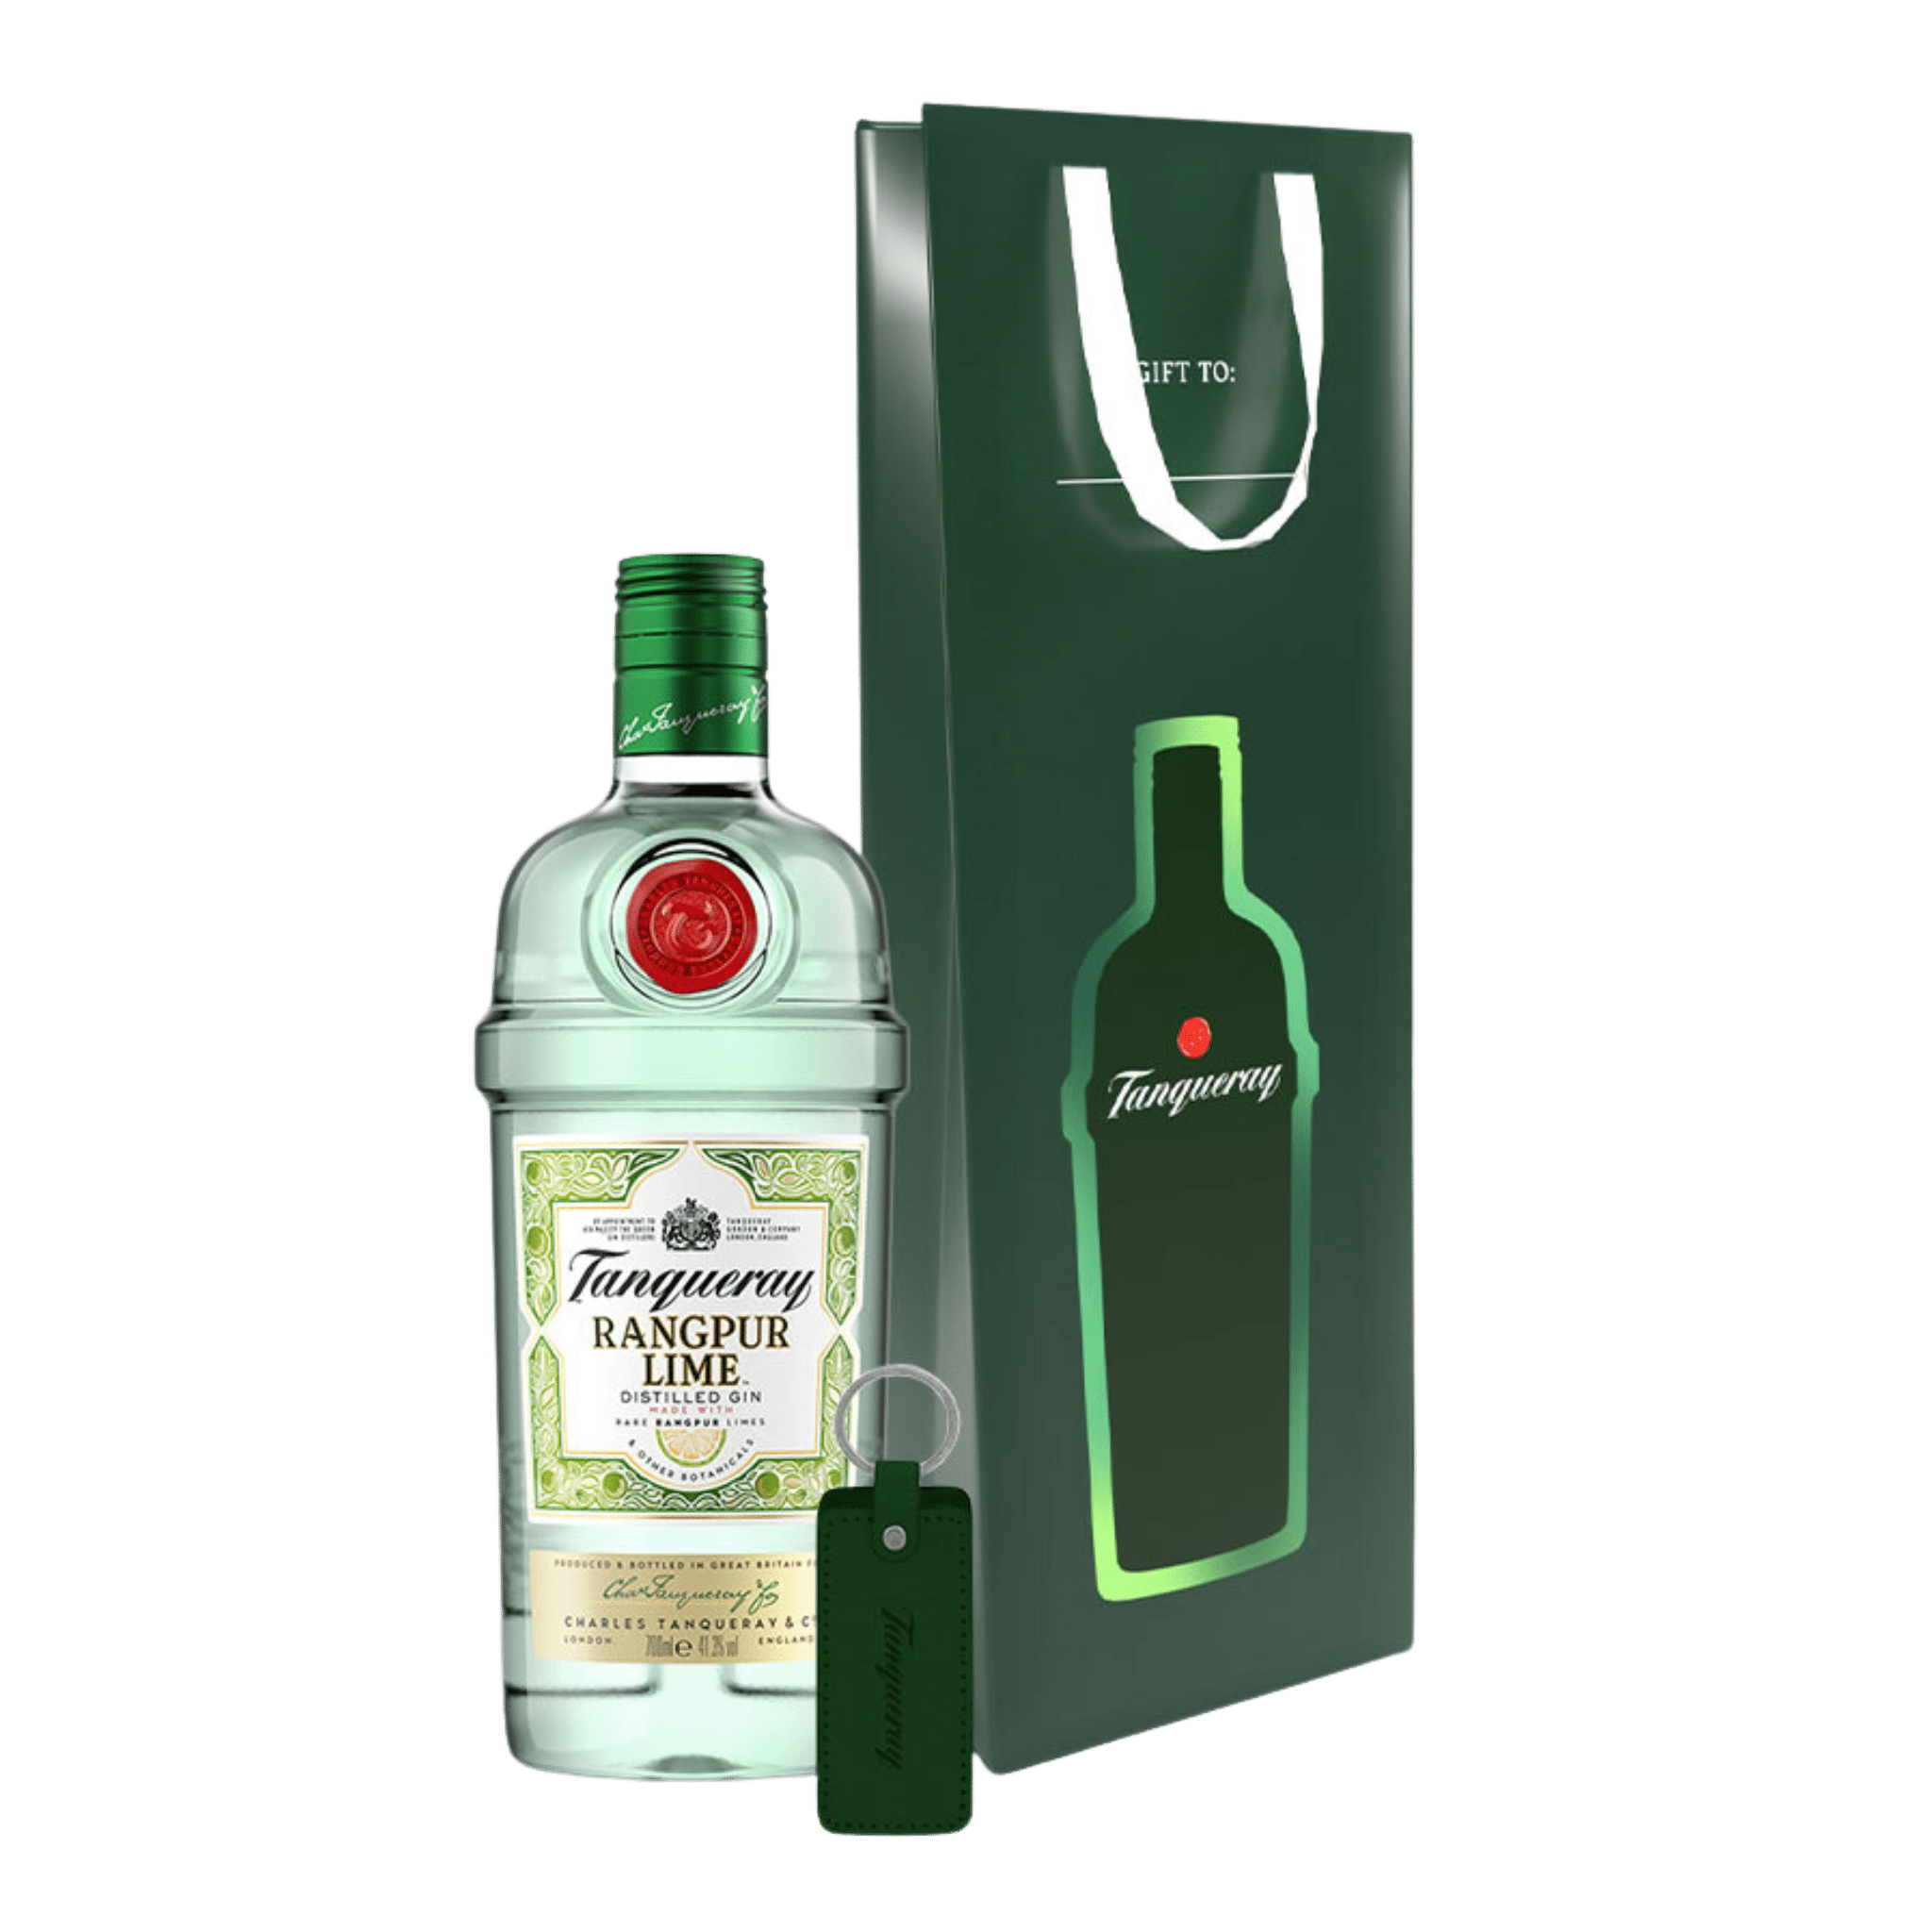 Tanqueray Rangpur 1L + Tanqueray Gift Bag with Keychain